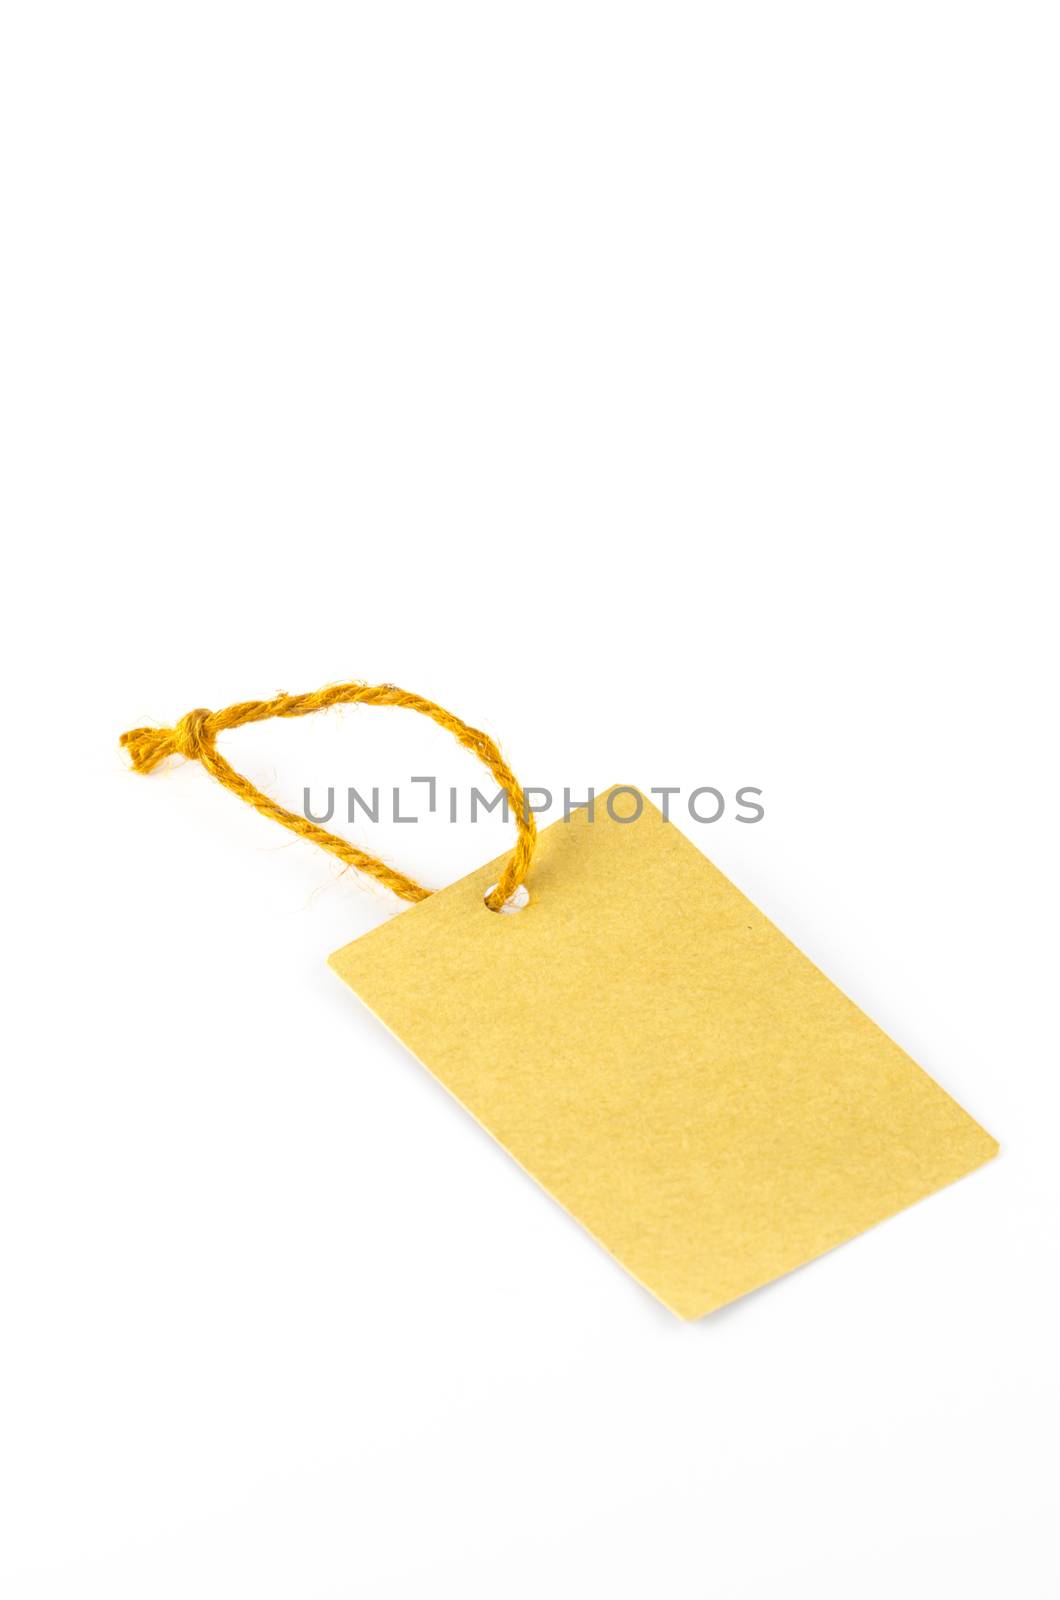 brown tag on a white background